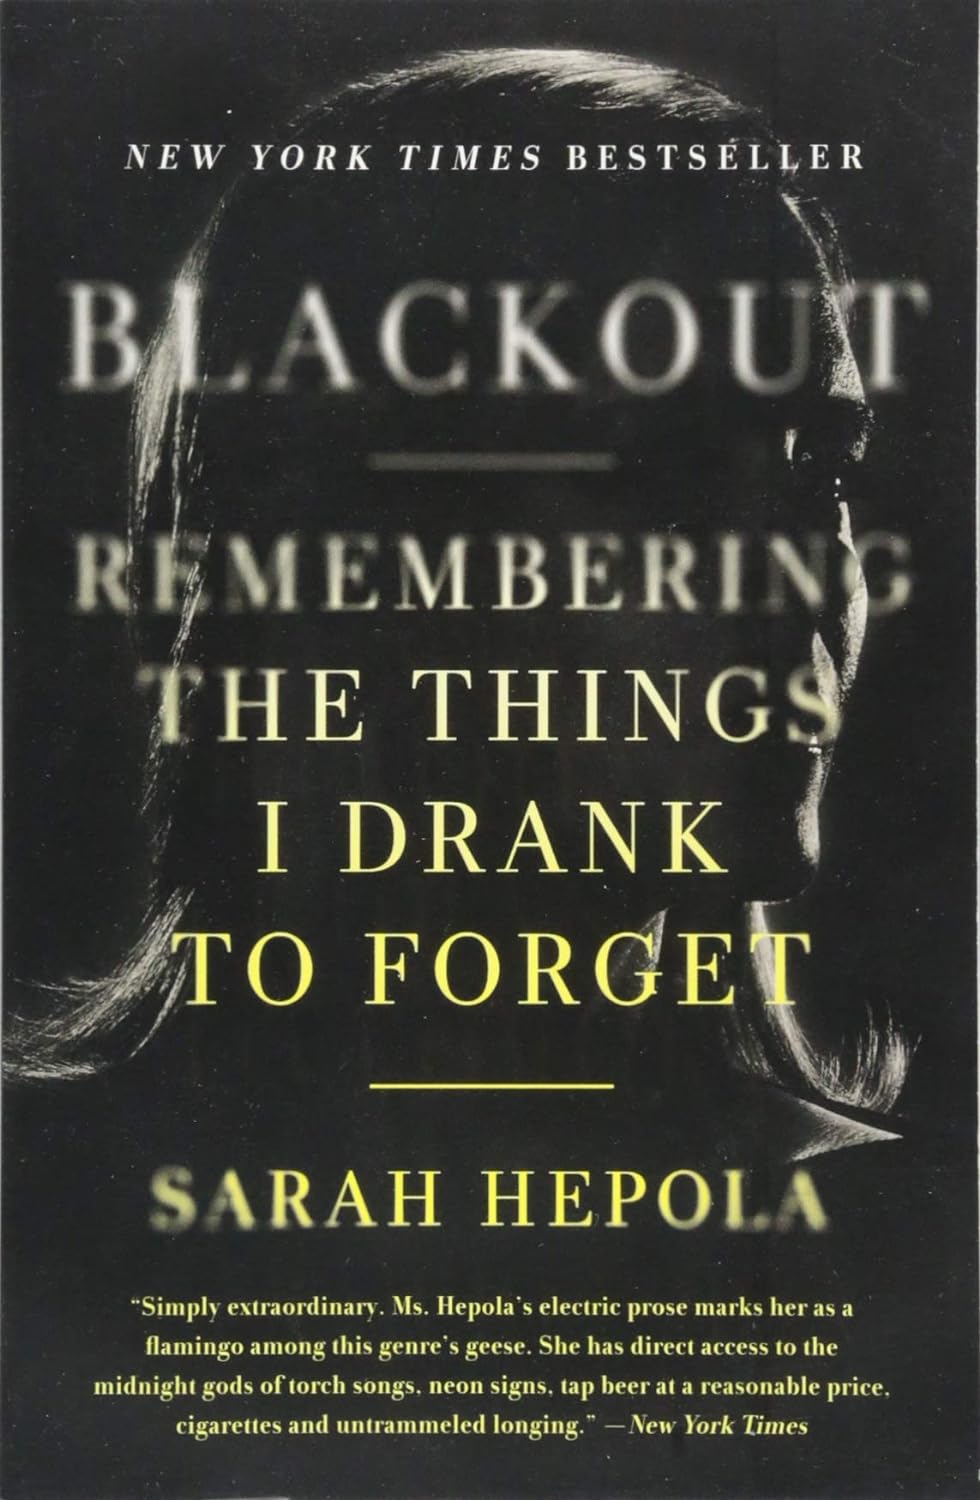 <p>If you’ve ever blacked out from drinking, then you know how terrifying it can be to have holes in your memory. <a href="https://www.amazon.com/Blackout-Remembering-Things-Drank-Forget/dp/1455554588/?tag=skmsn-20"><em>Blackout</em></a> is a <em>New York Times</em>-bestselling memoir on this very topic. Author Sarah Hepola used to drink so heavily that she’d black out on the regular. Like many writers and artists, she once believed that her creative spark came from alcohol. Eventually, her excessive drinking (and frequent blackouts) began untenable. She documents her journey of getting sober with humor and unflinching honesty, illuminating the transformative power of ditching drinking.</p> <a href="https://www.amazon.com/dp/1455554588?tag=skmsn-20&linkCode=ogi&th=1&psc=1&language=en_US&asc_source=web&asc_campaign=web&asc_refurl=https%3A%2F%2Fwww.sheknows.com%2F%3Fpost_type%3Dpmc-gallery%26p%3D2892532" rel="nofollow">Buy: 'Blackout' $12.99</a>